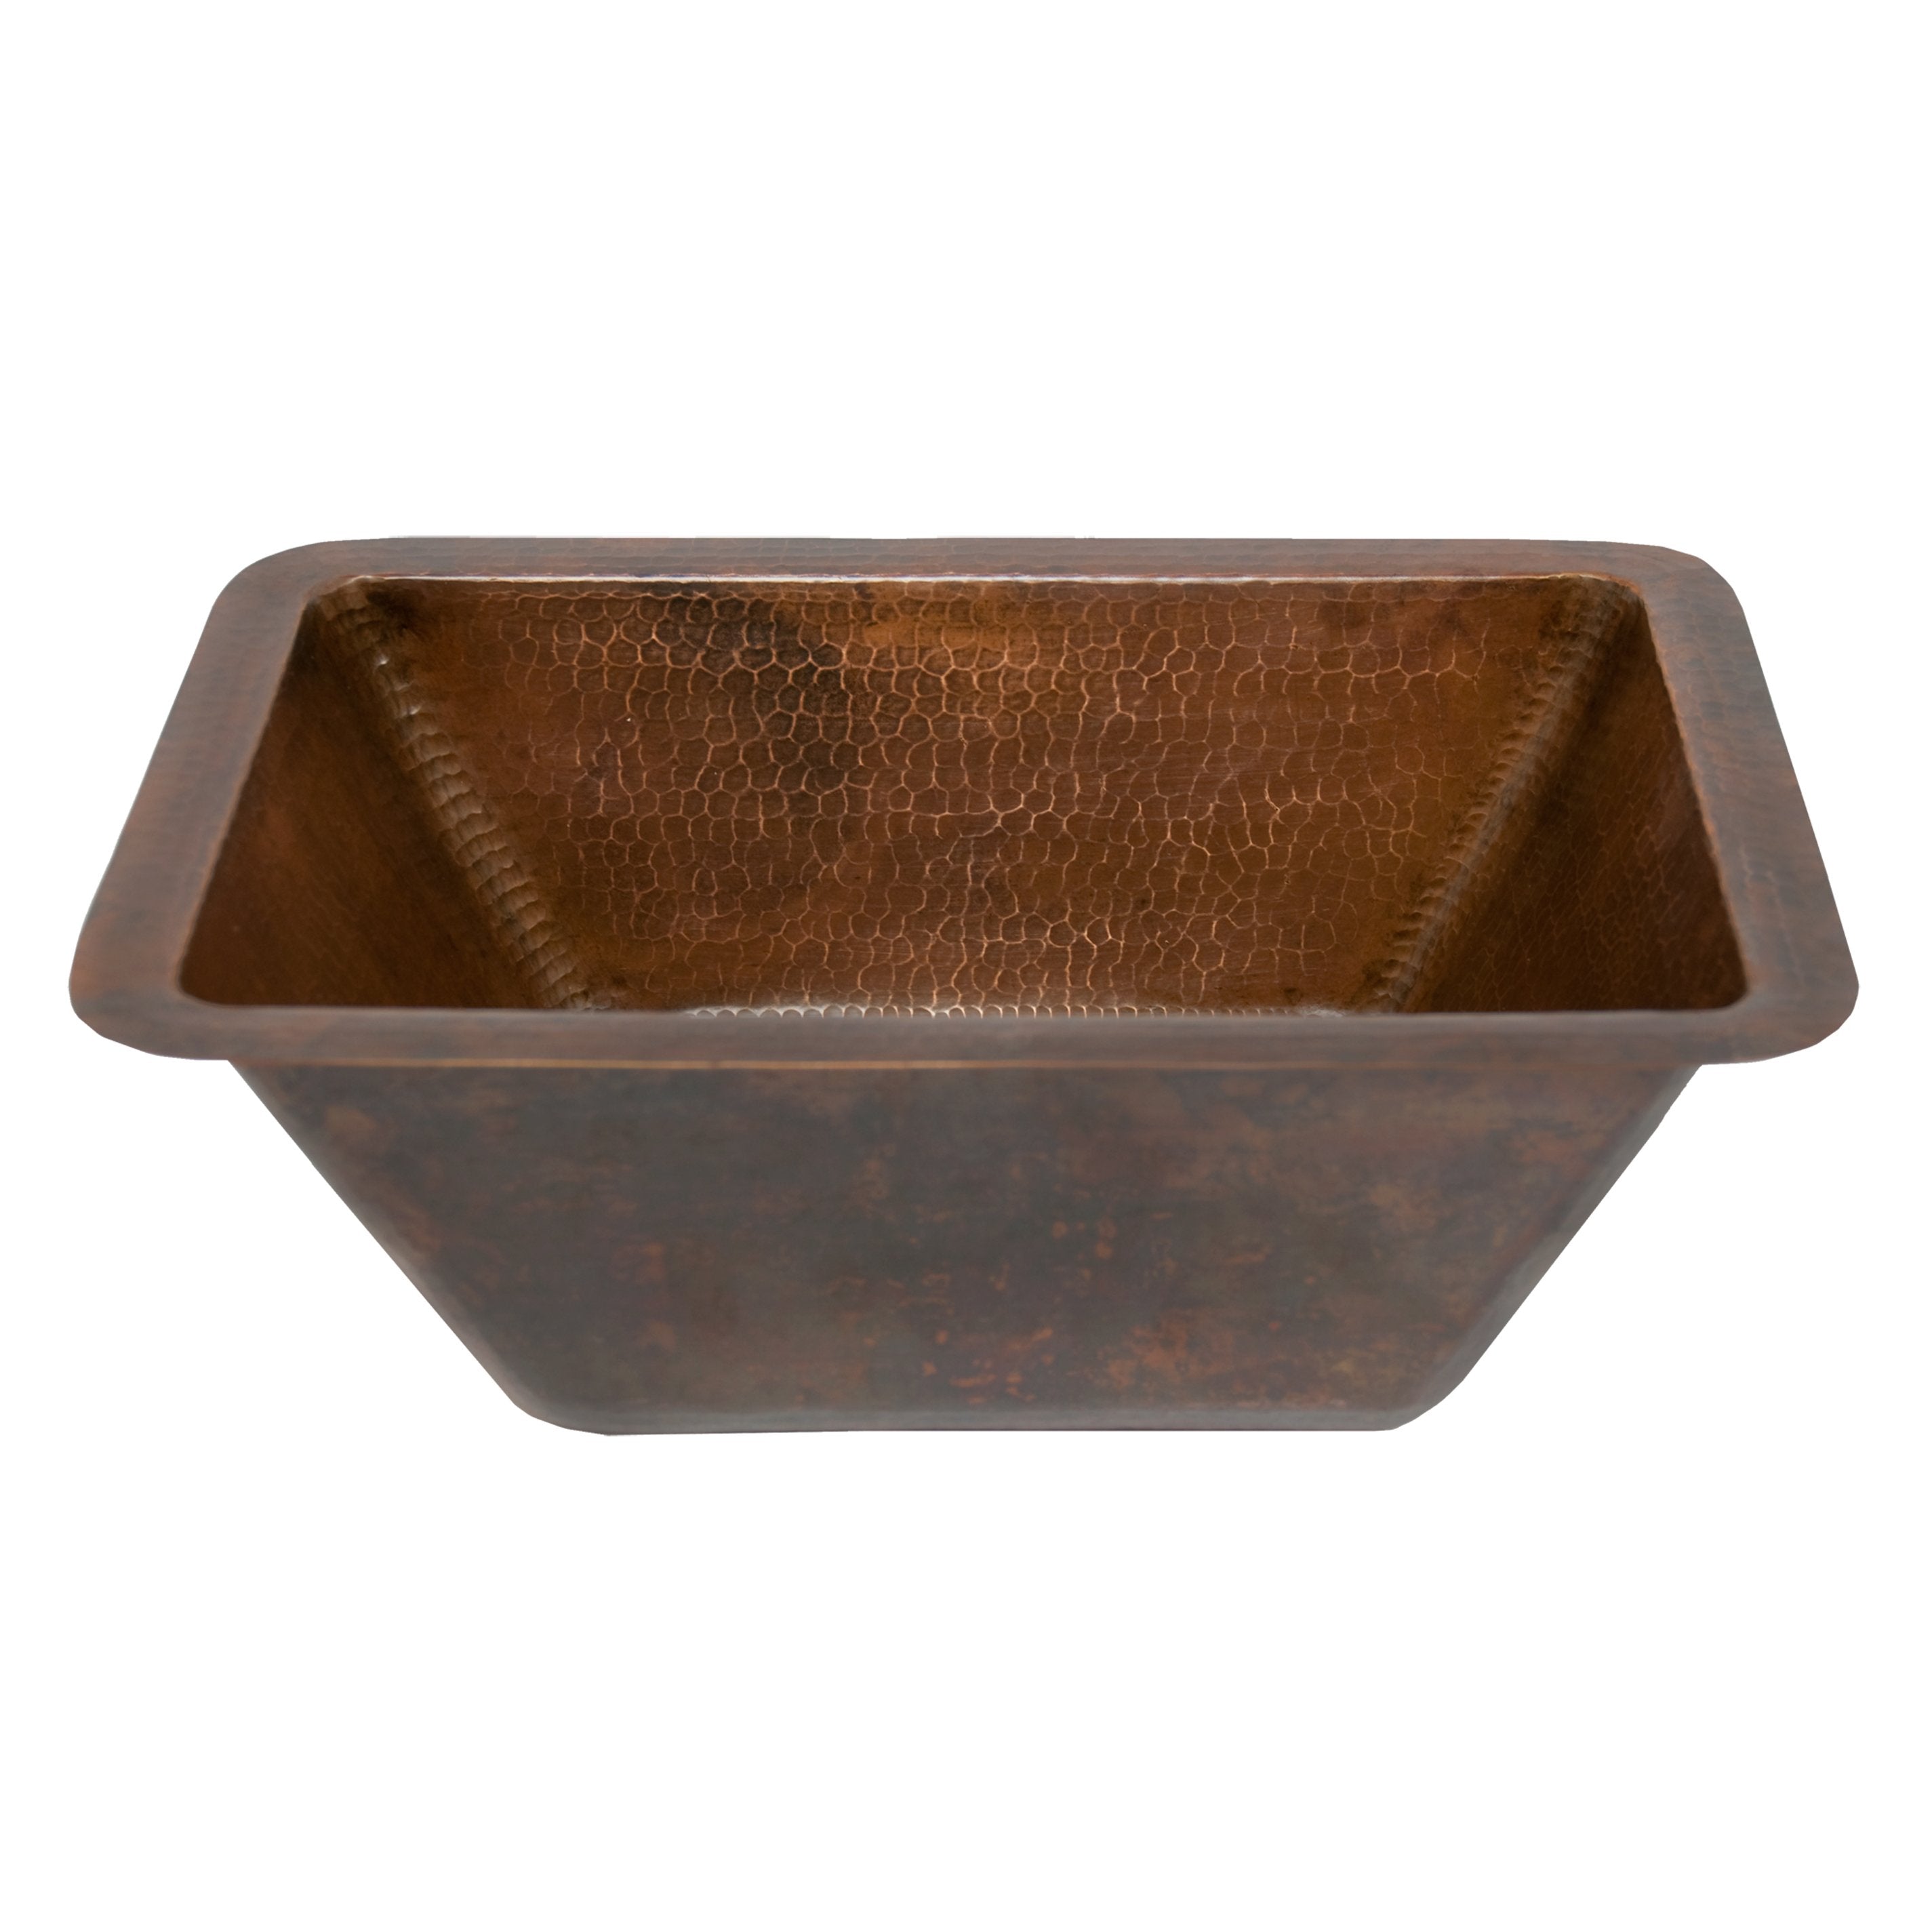 Premier Copper Products Rectangle Hammered Copper Bathroom Sink-DirectSinks